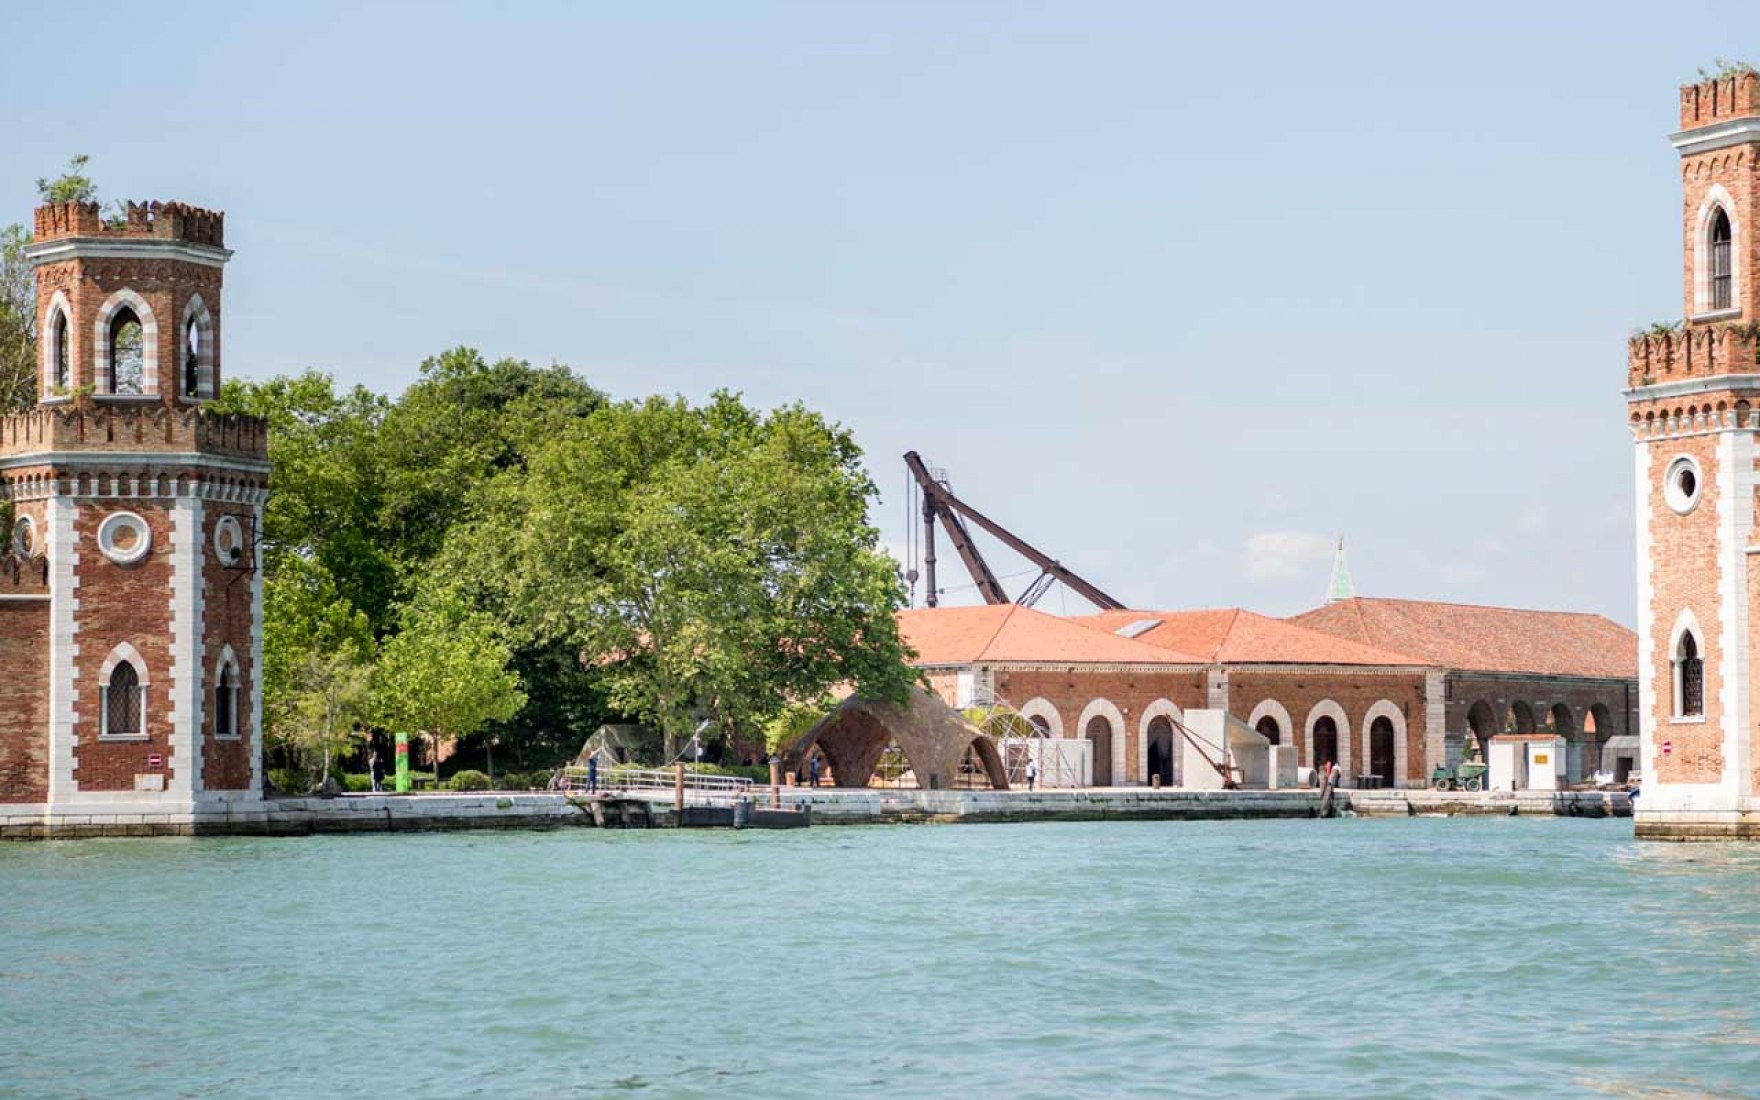 Prototype Droneport Shell – 15th International Architecture Biennale, Venice, Italy The Droneport’s location at the end of the Arsenale in Venice is symbolic as the gateway to a newly opened public park. The possibility of the structure remaining as a permanent legacy is now under consideration. Image © courtesy of LafargeHolcim Foundation